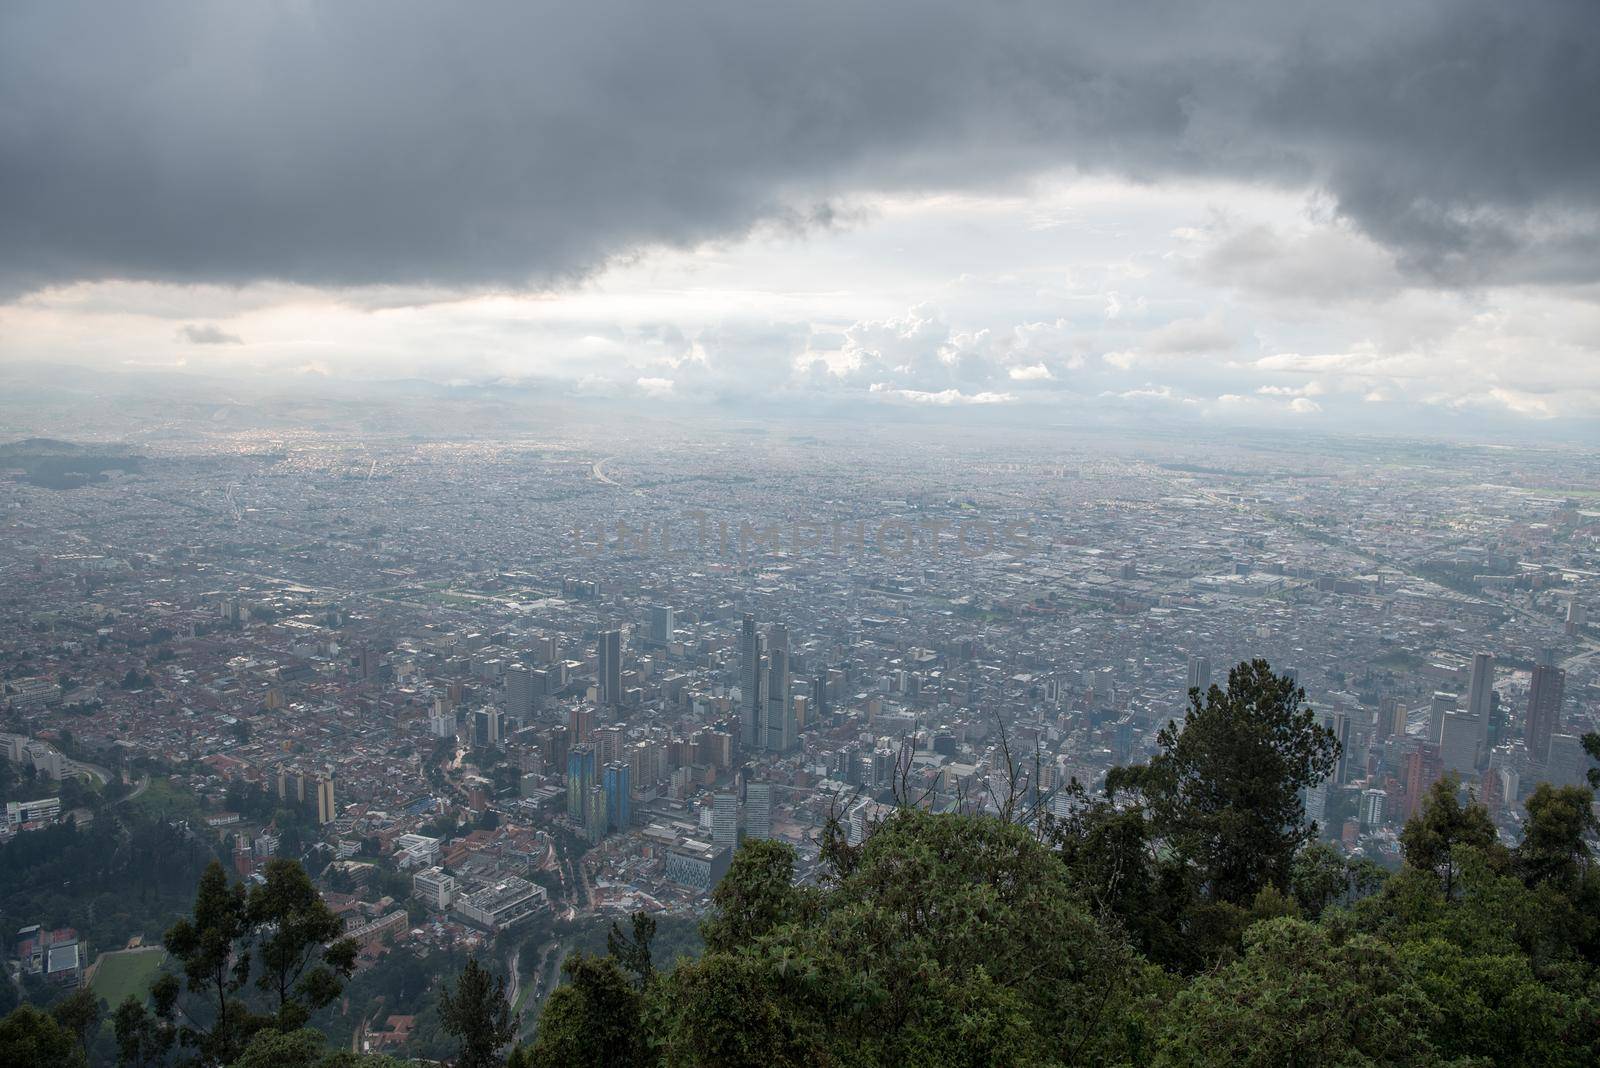 Mount Monserrate in Bogota, Colombia. Storm clouds and skyline. by jyurinko